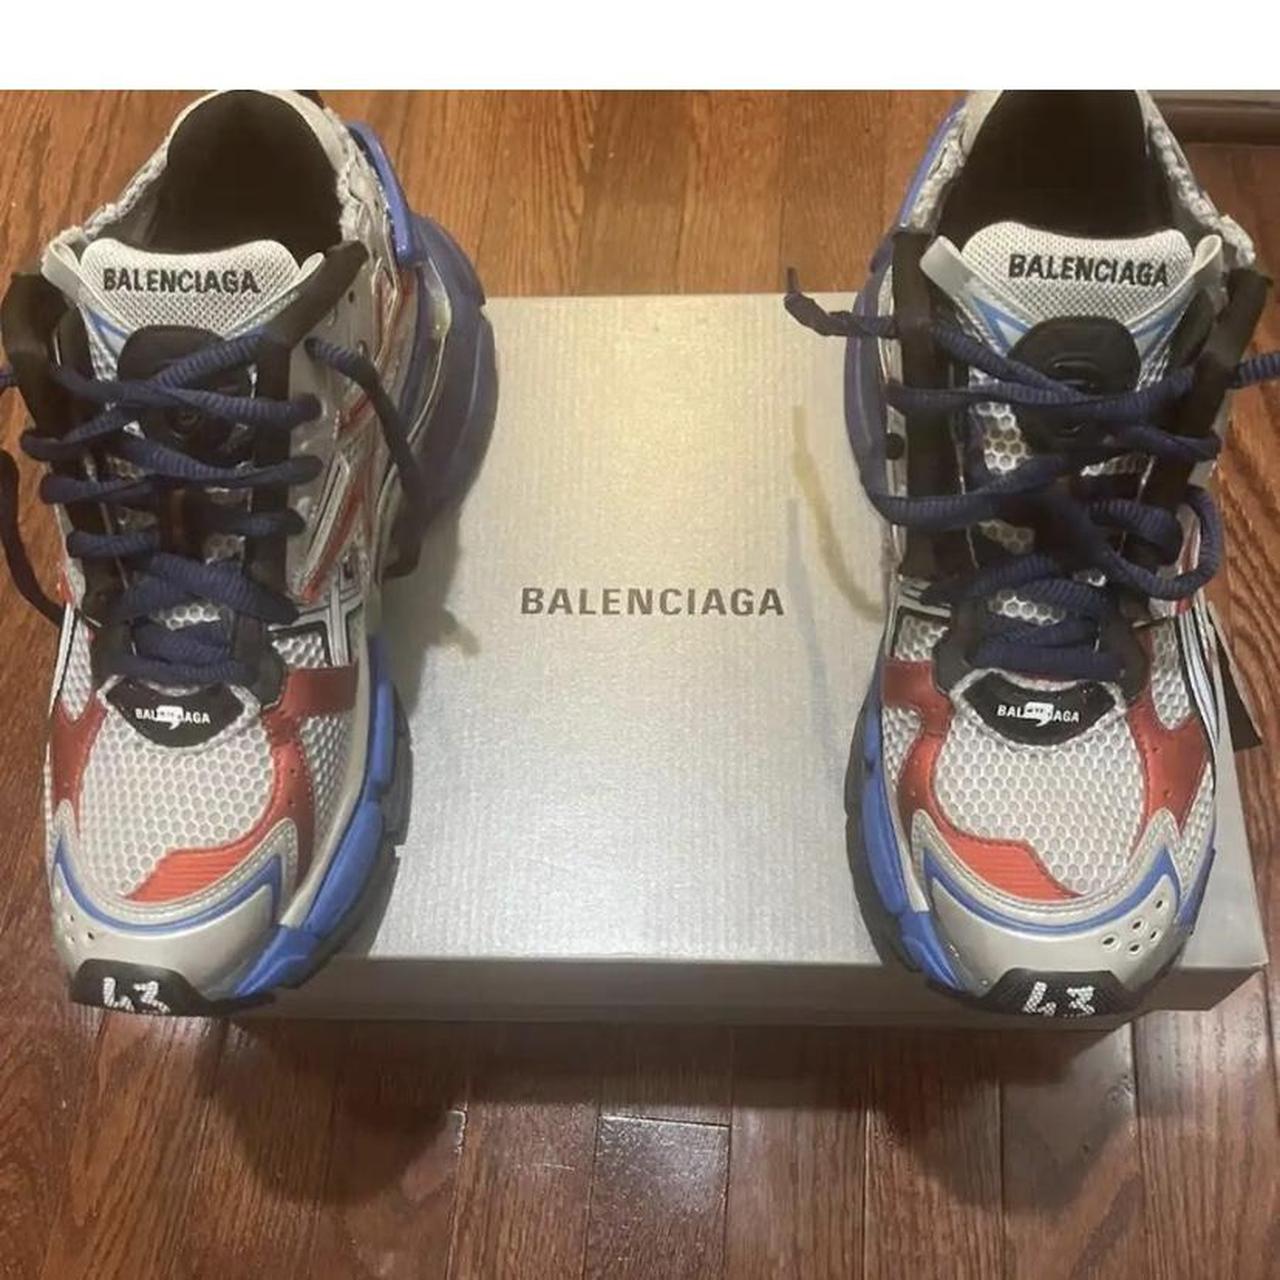 Balenciaga runners good condition open up to offers - Depop